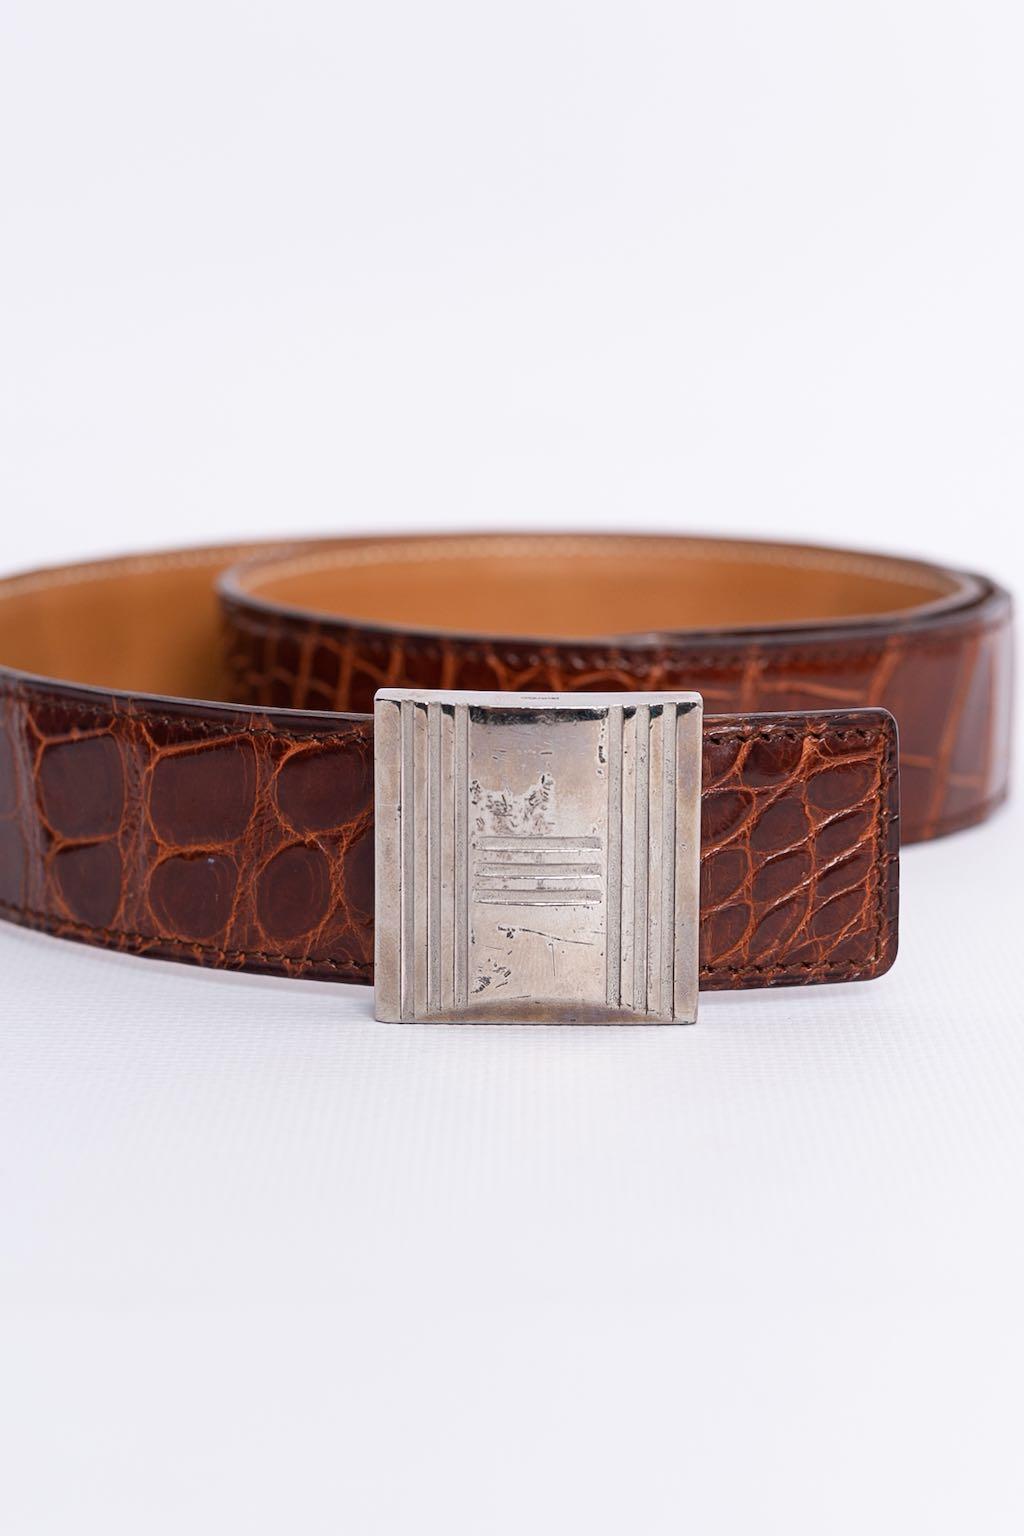 Hermes Belt in Crocodile and Brown Leather For Sale 4